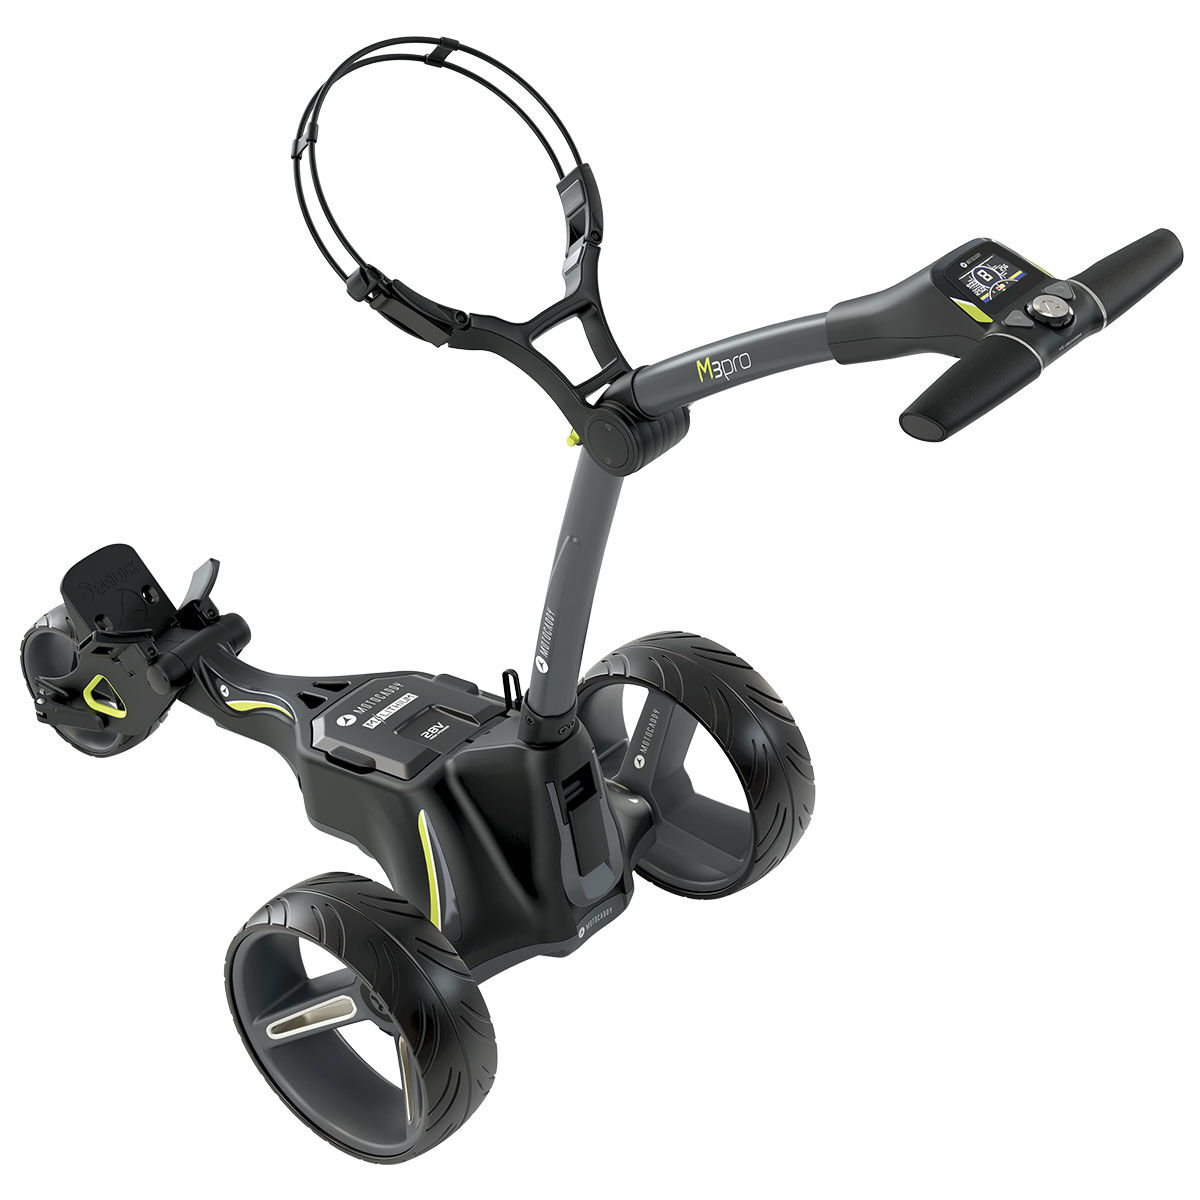 Motocaddy Grey M3 Pro Extended Range Lithium Electric Golf Trolley (with Accessories & 36 Hole Battery), Size: 650x470x410mm| American Golf